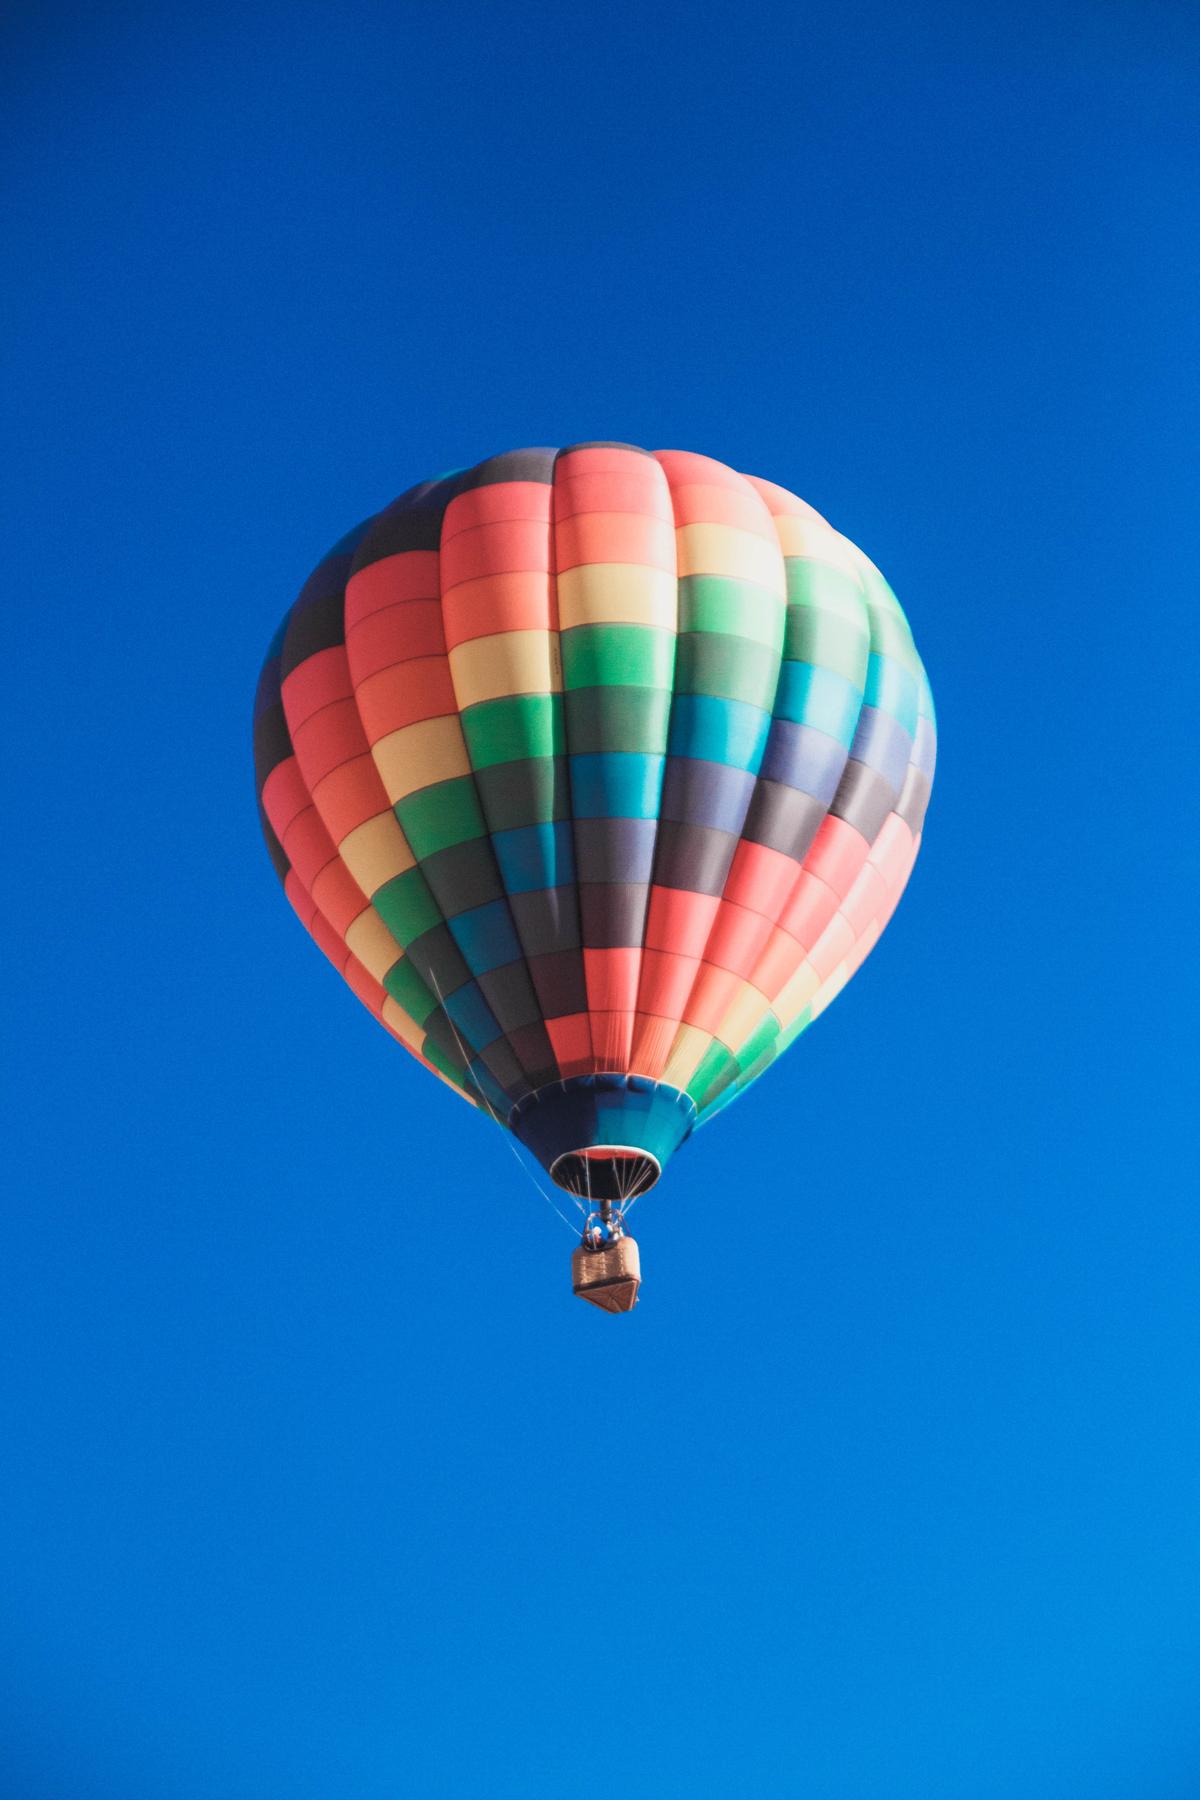 A colorful hot air balloon soaring above the picturesque landscape of Albuquerque.